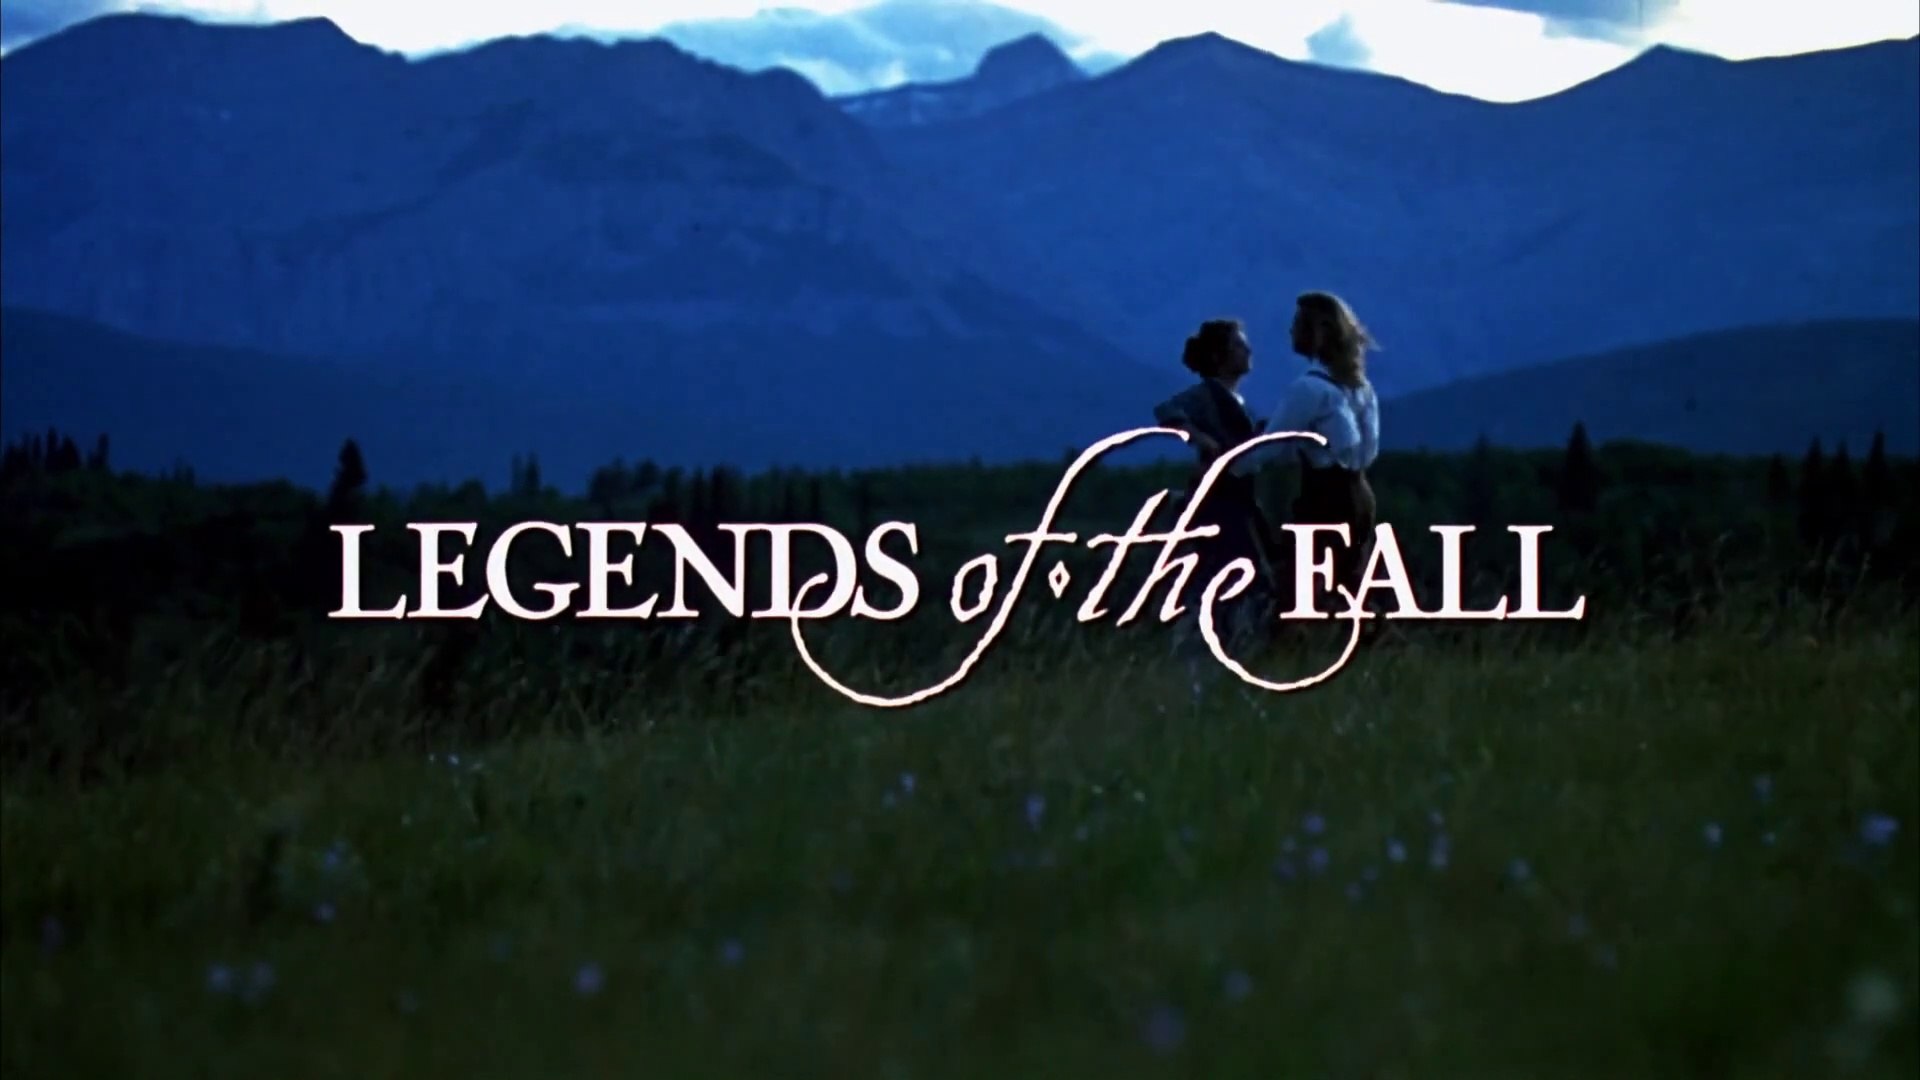 Legends of the Fall (Trailer) on Vimeo